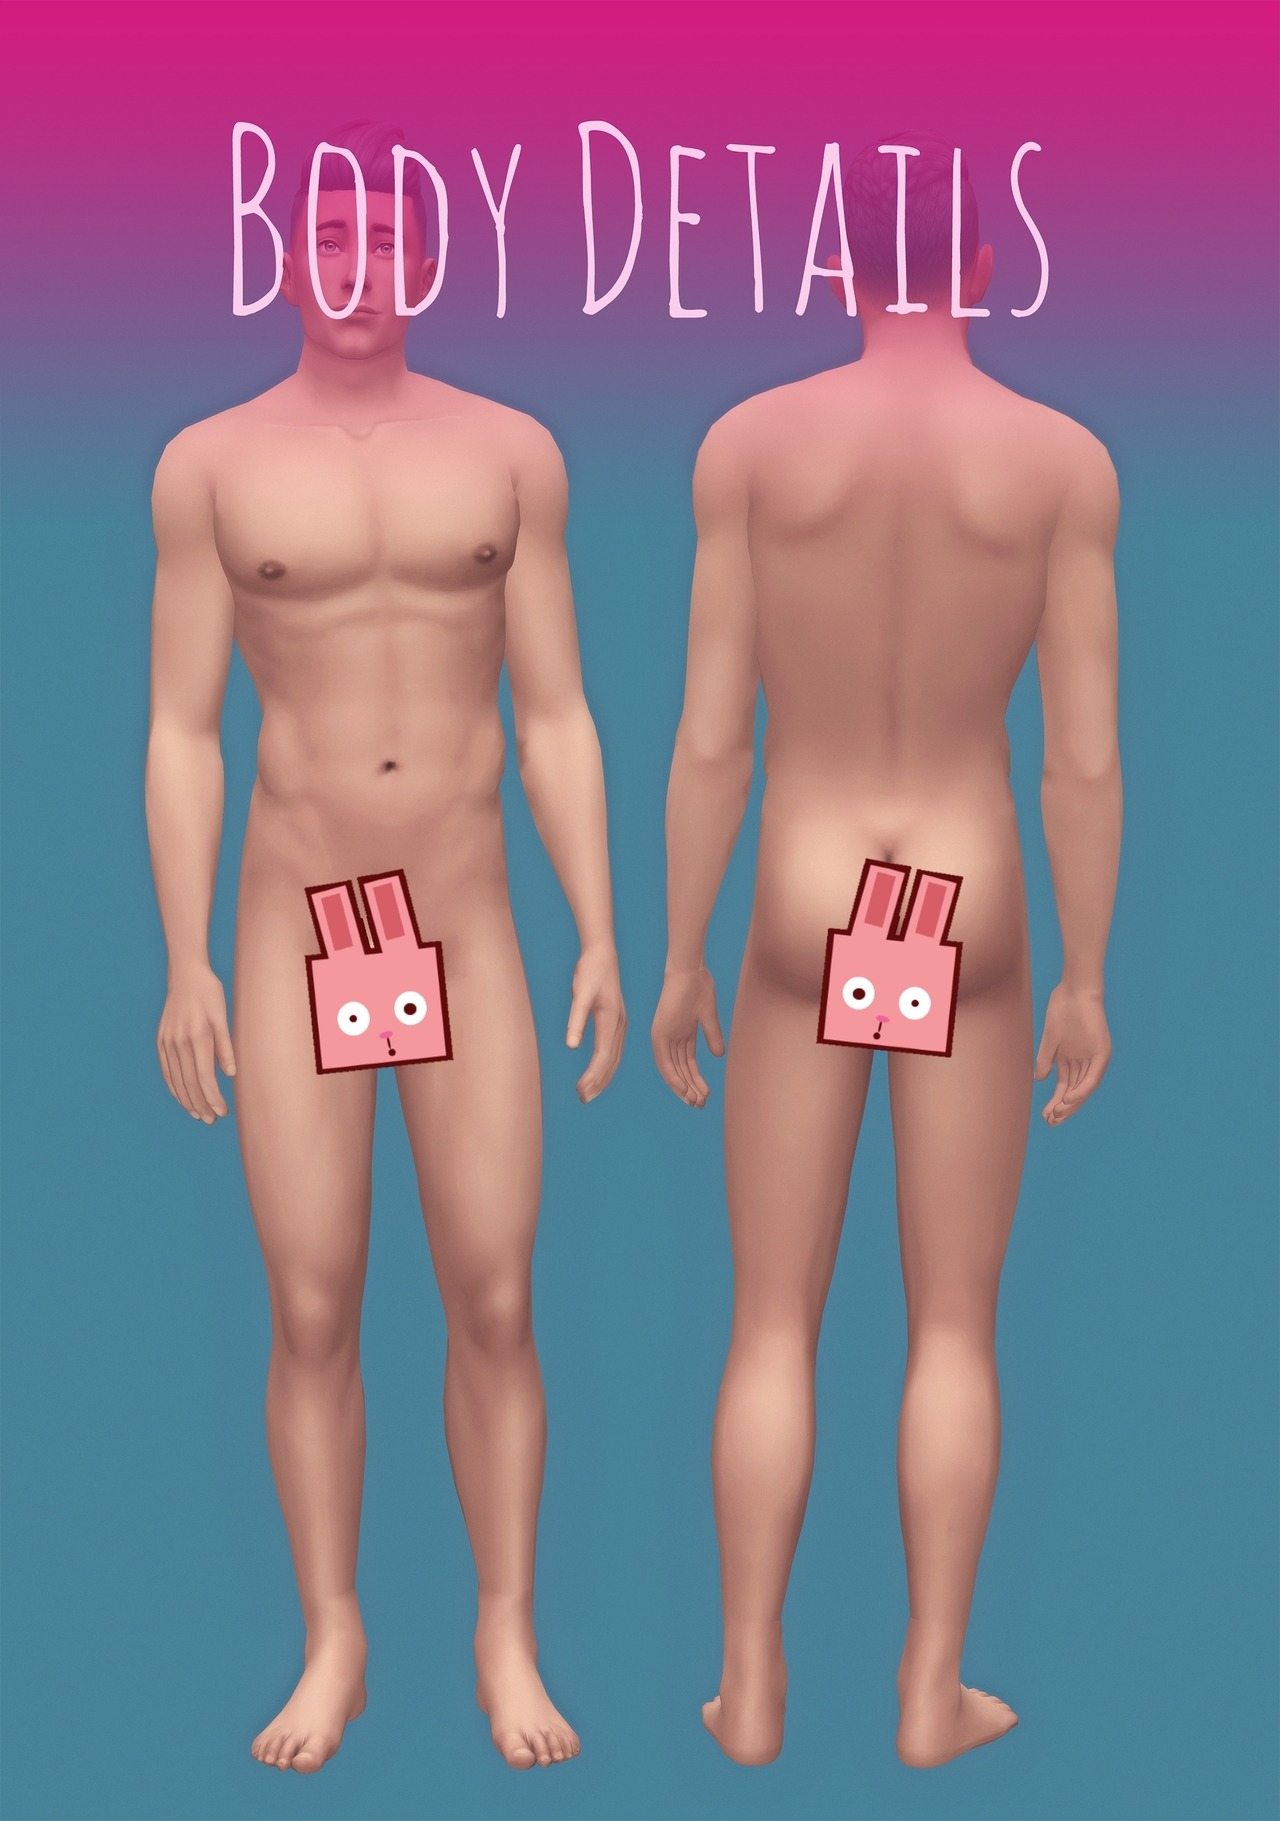 PEGGY [M] SKINBLEND - by amoebae
A male frame version of my previous Peggy skin. A blend of details from different skins, with some additional hand-painting.
Comes in two versions, the only difference being a stylised collarbone or TS4′s original...